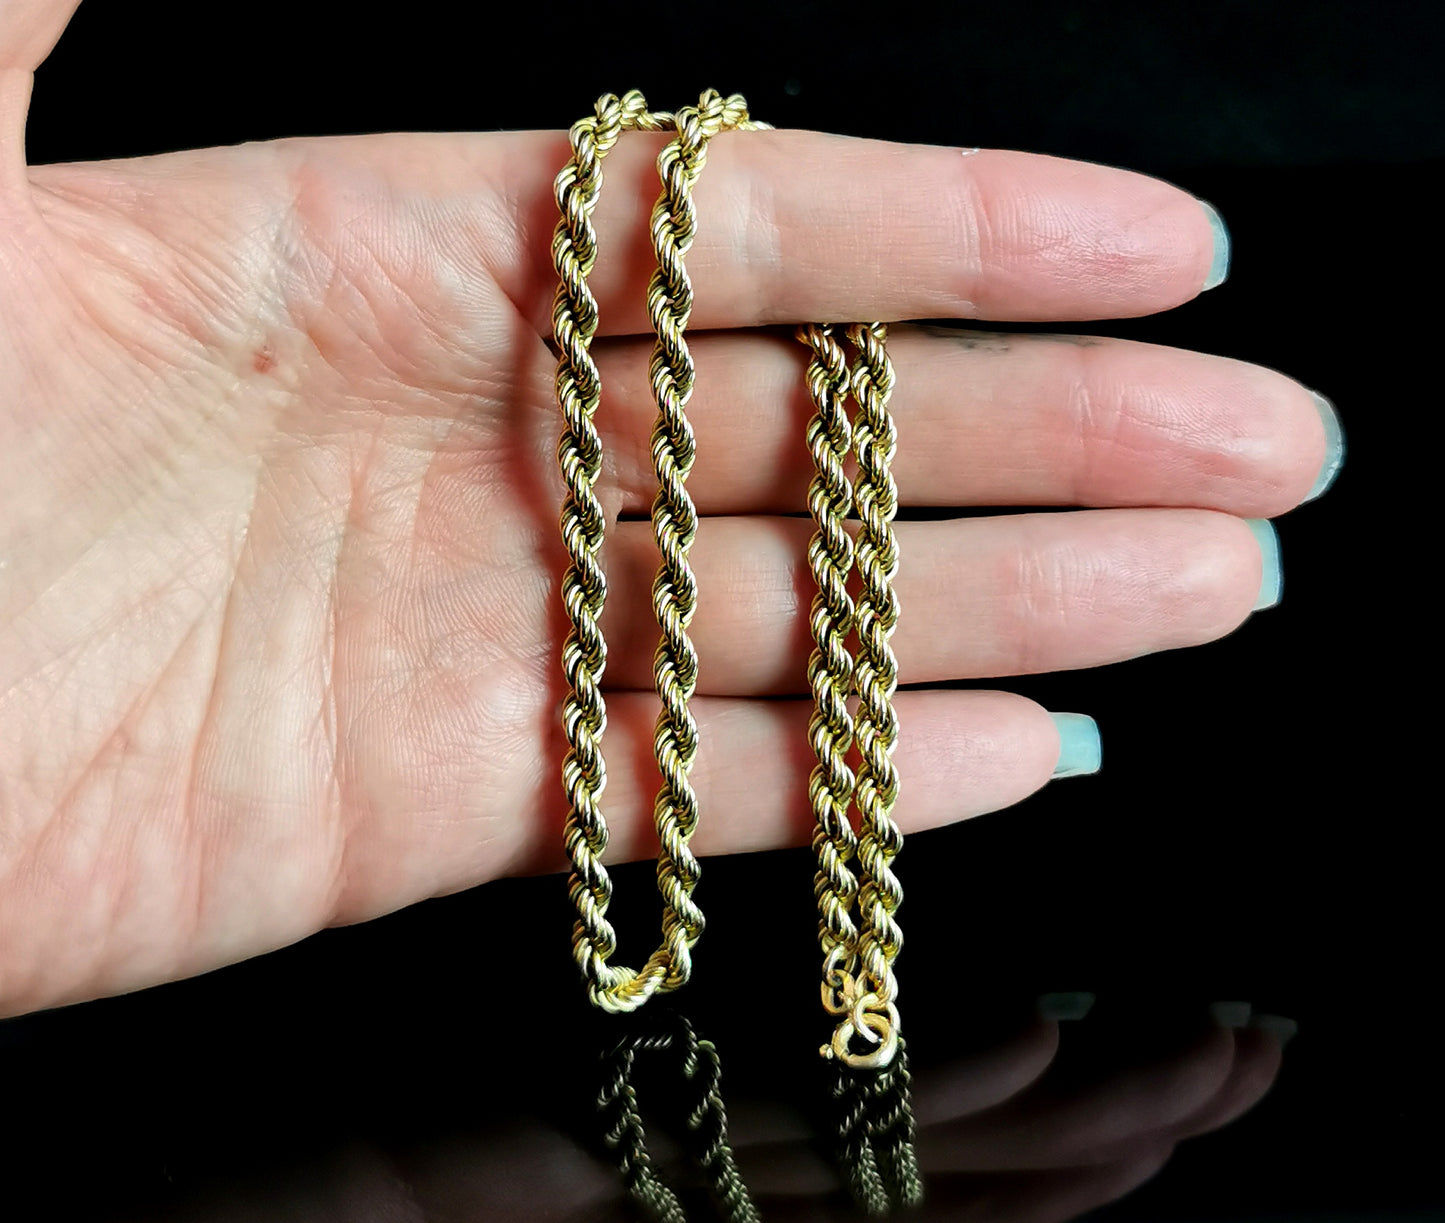 Vintage 9ct yellow gold Rope Chain necklace, Italian